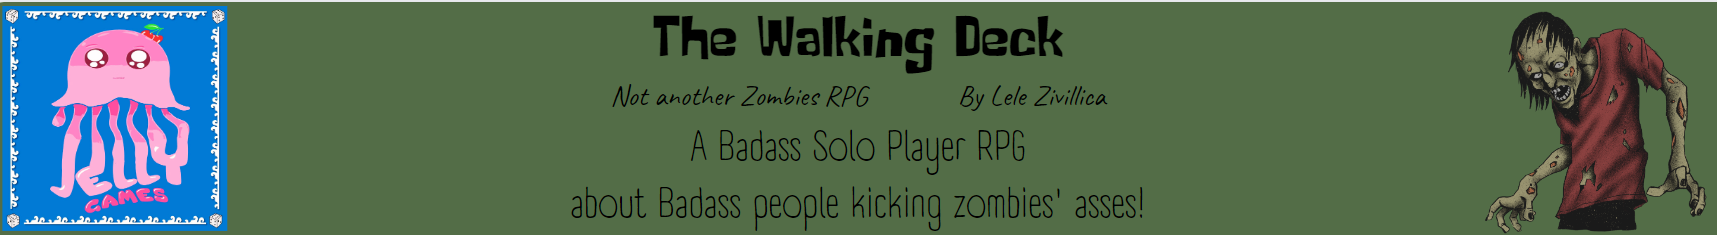 The Walking Deck - NOT another Zombies RPG